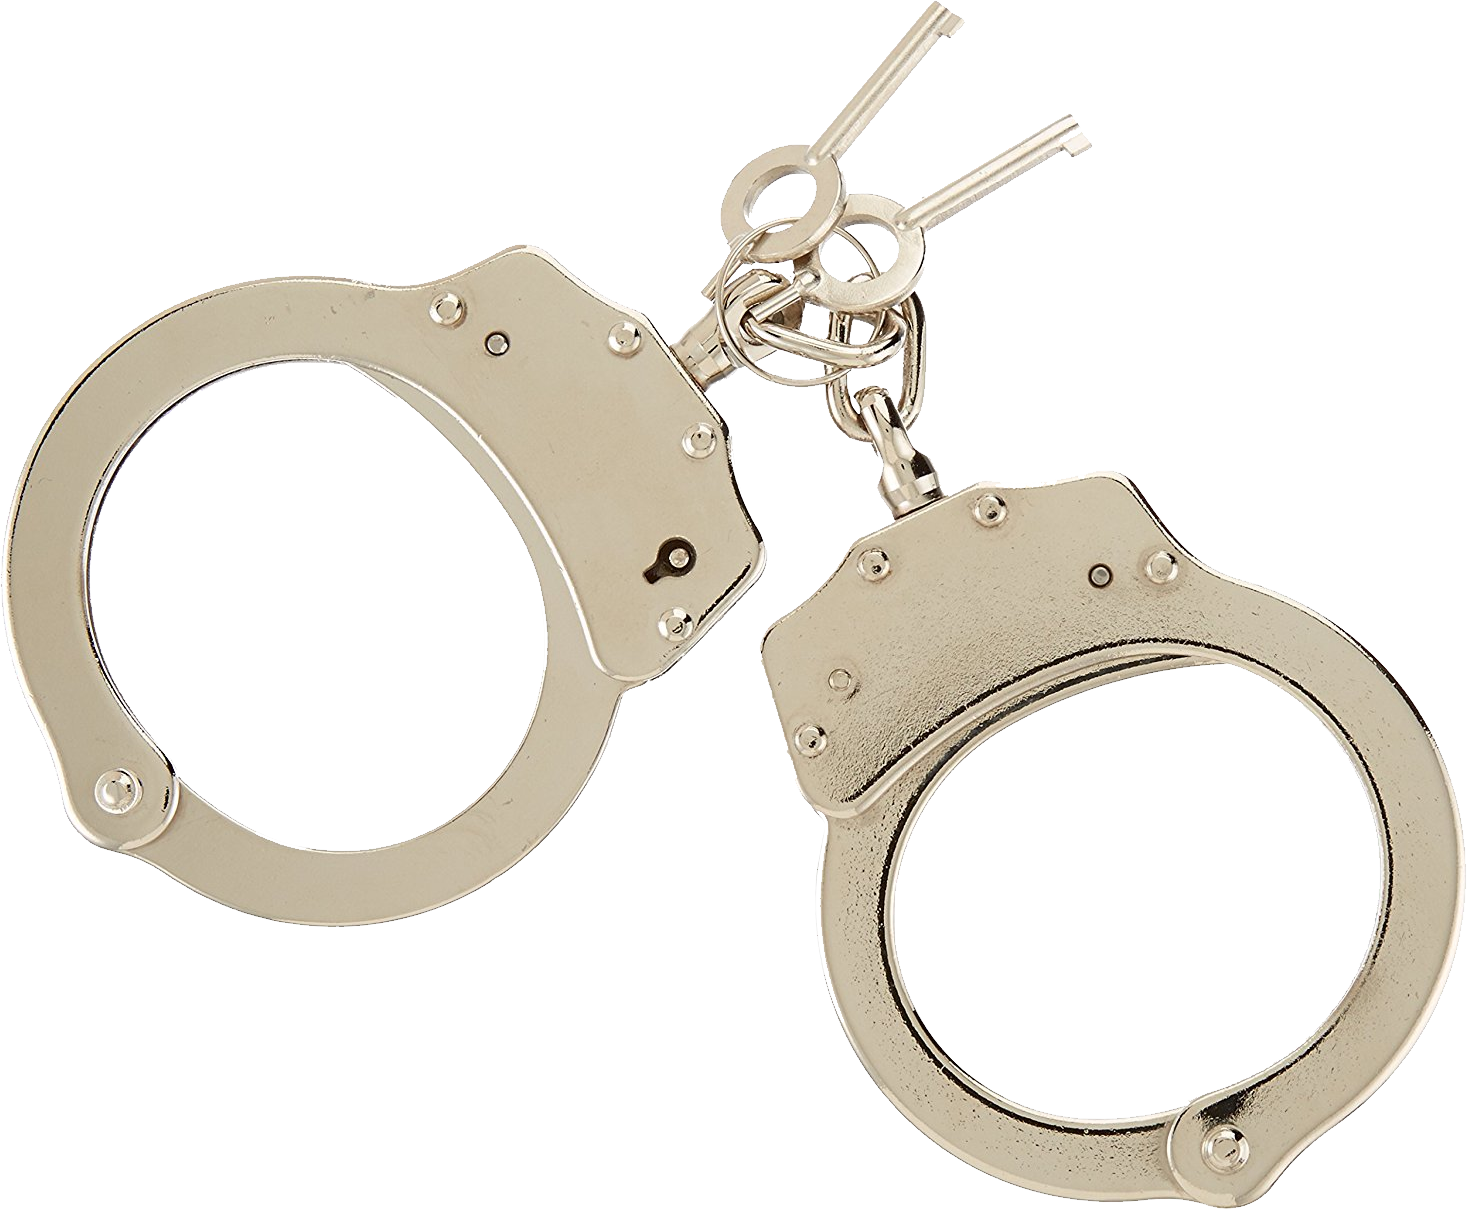 handcuffs png images download crazypngm crazy png images download #29592